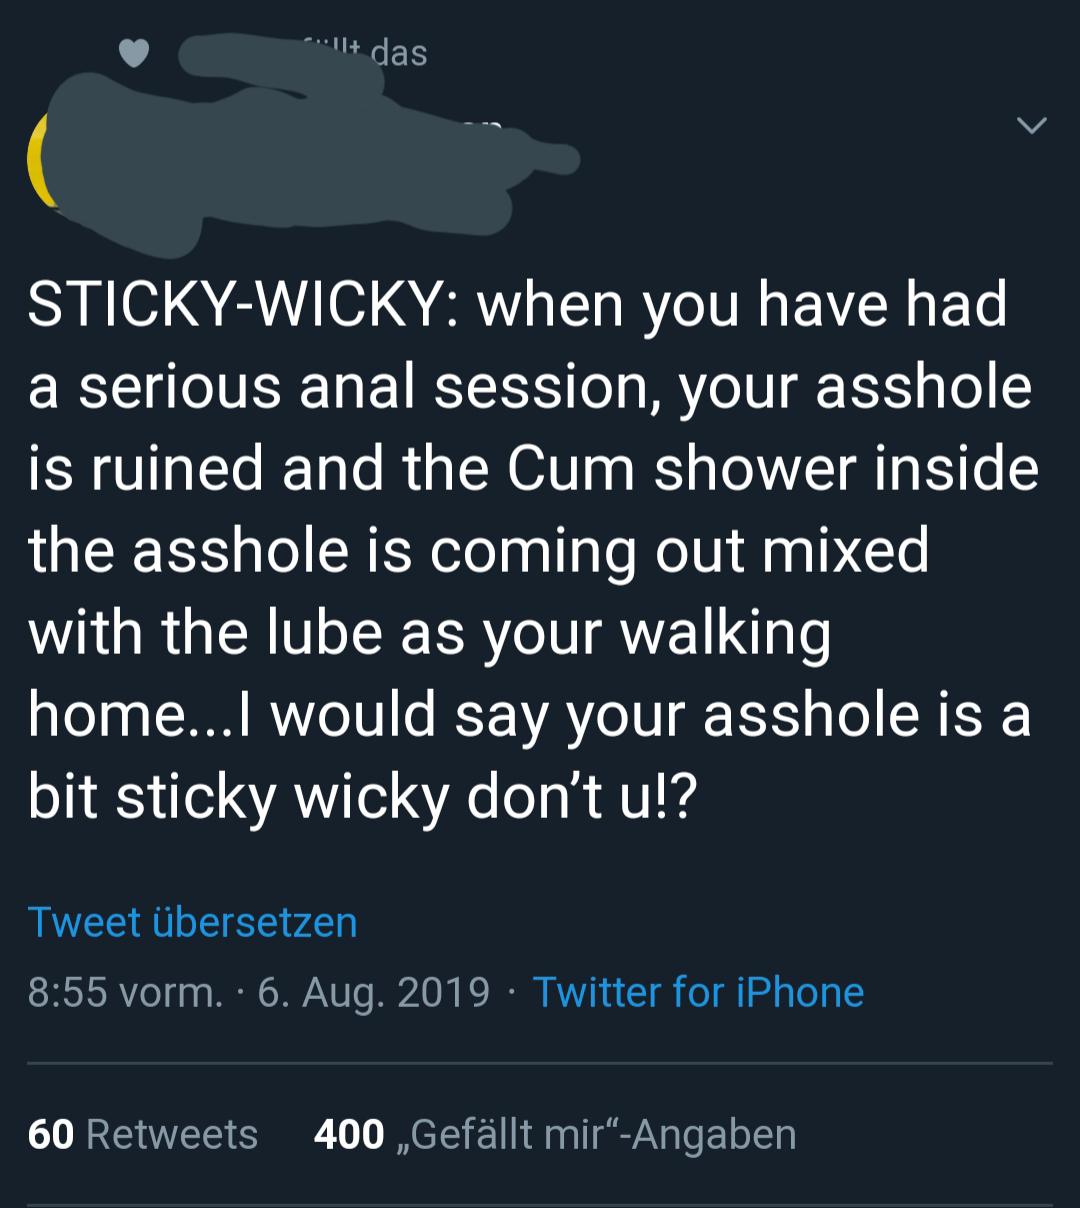 lyrics - llt das StickyWicky when you have had a serious anal session, your asshole is ruined and the Cum shower inside the asshole is coming out mixed with the lube as your walking home... I would say your asshole is a bit sticky wicky don't u!? Tweet be